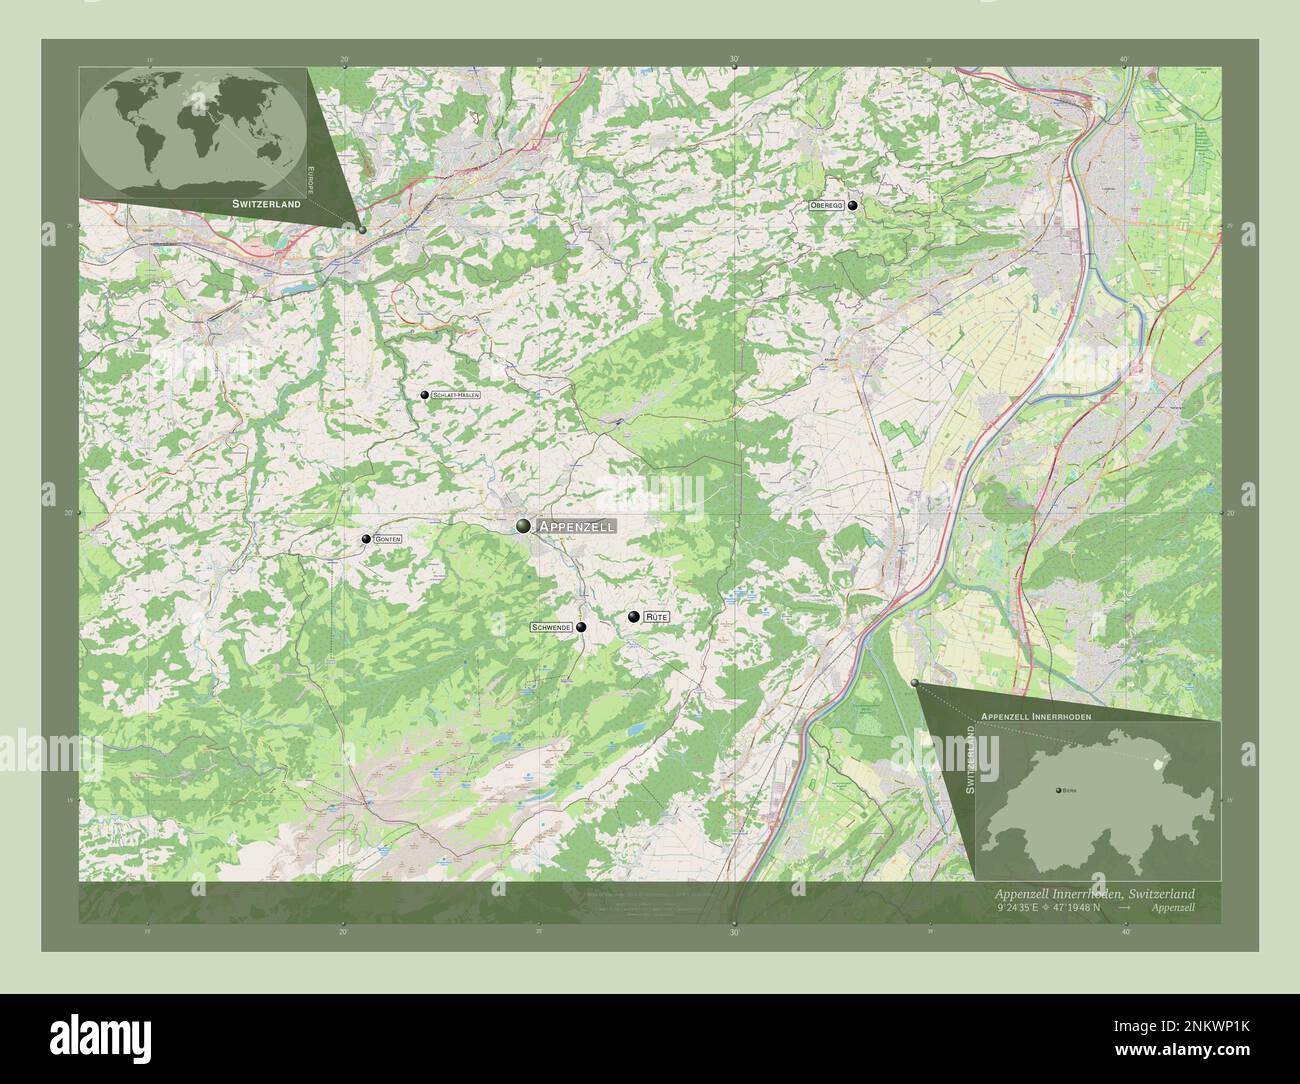 Appenzell Innerrhoden, canton of Switzerland. Open Street Map. Locations and names of major cities of the region. Corner auxiliary location maps Stock Photo